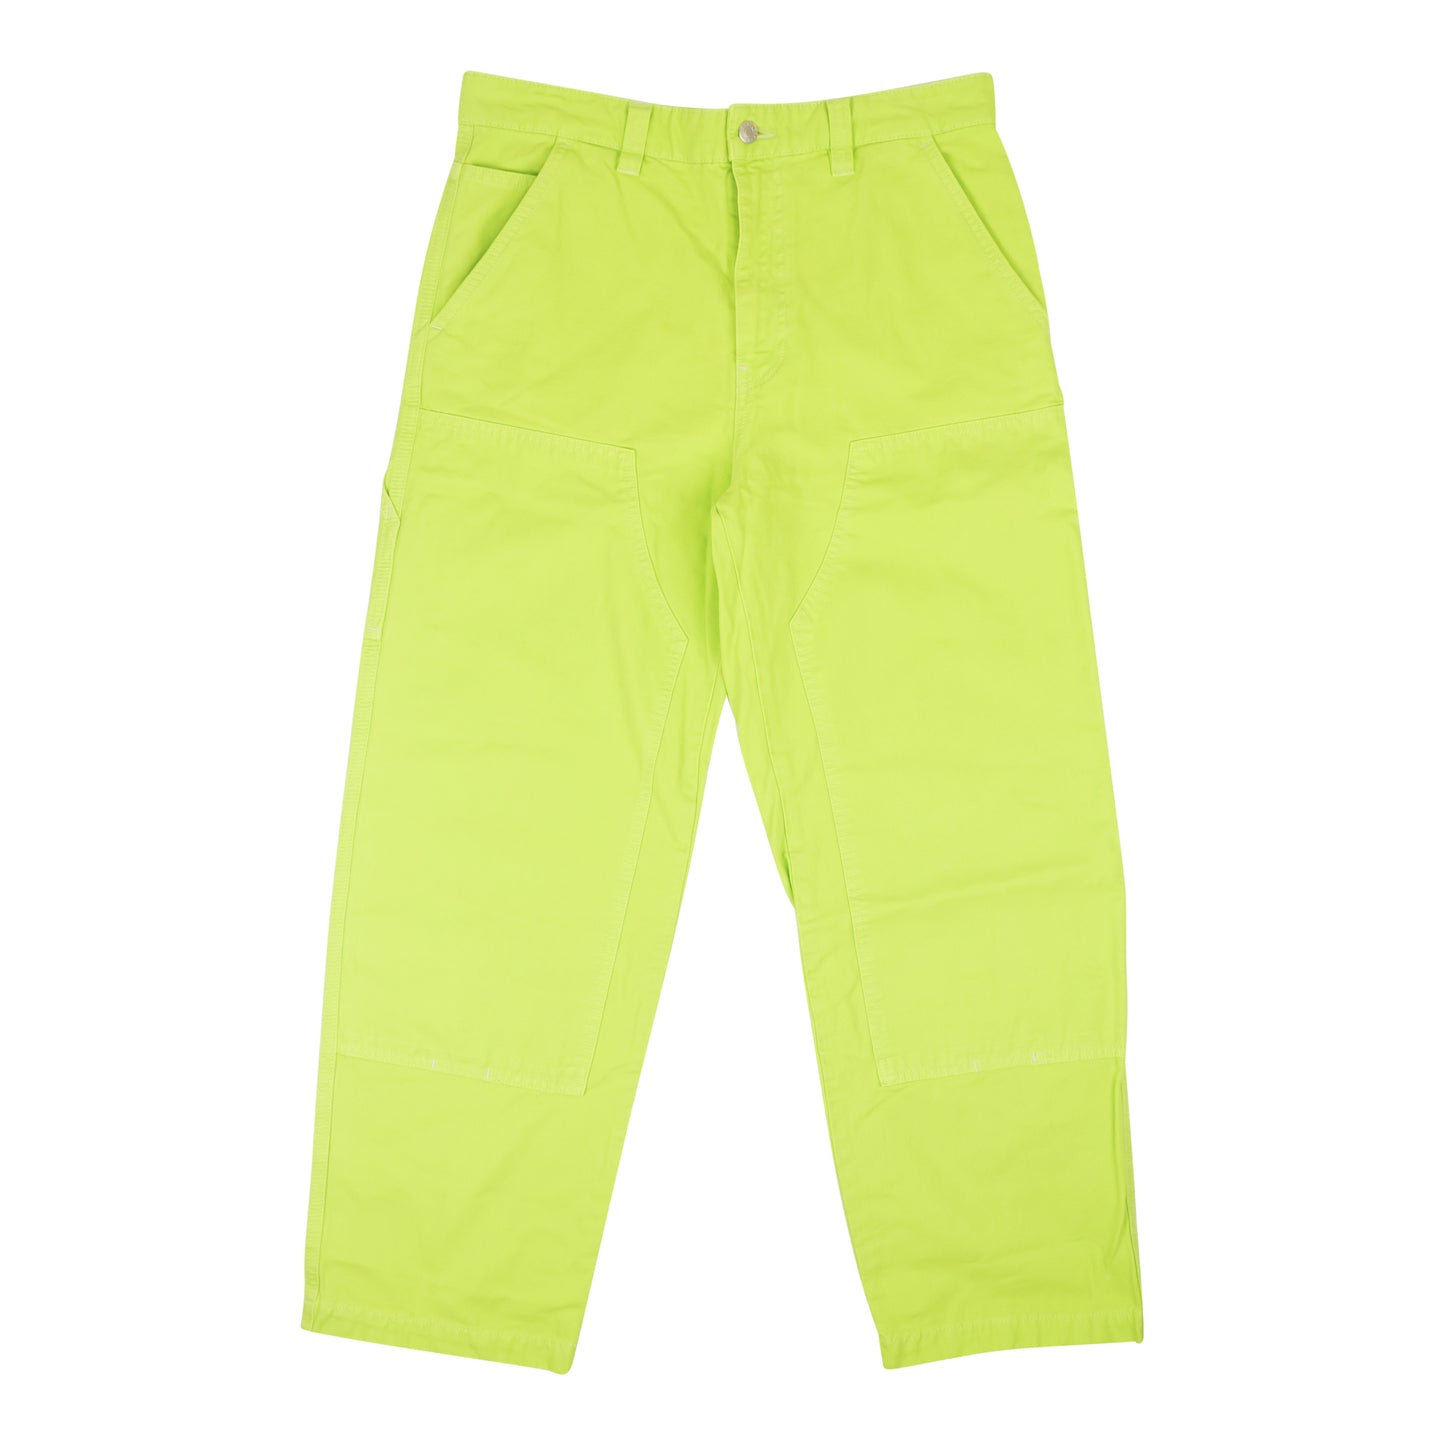 Stussy Cotton Dyed Canvas Casual Work Pants - Neon Yellow